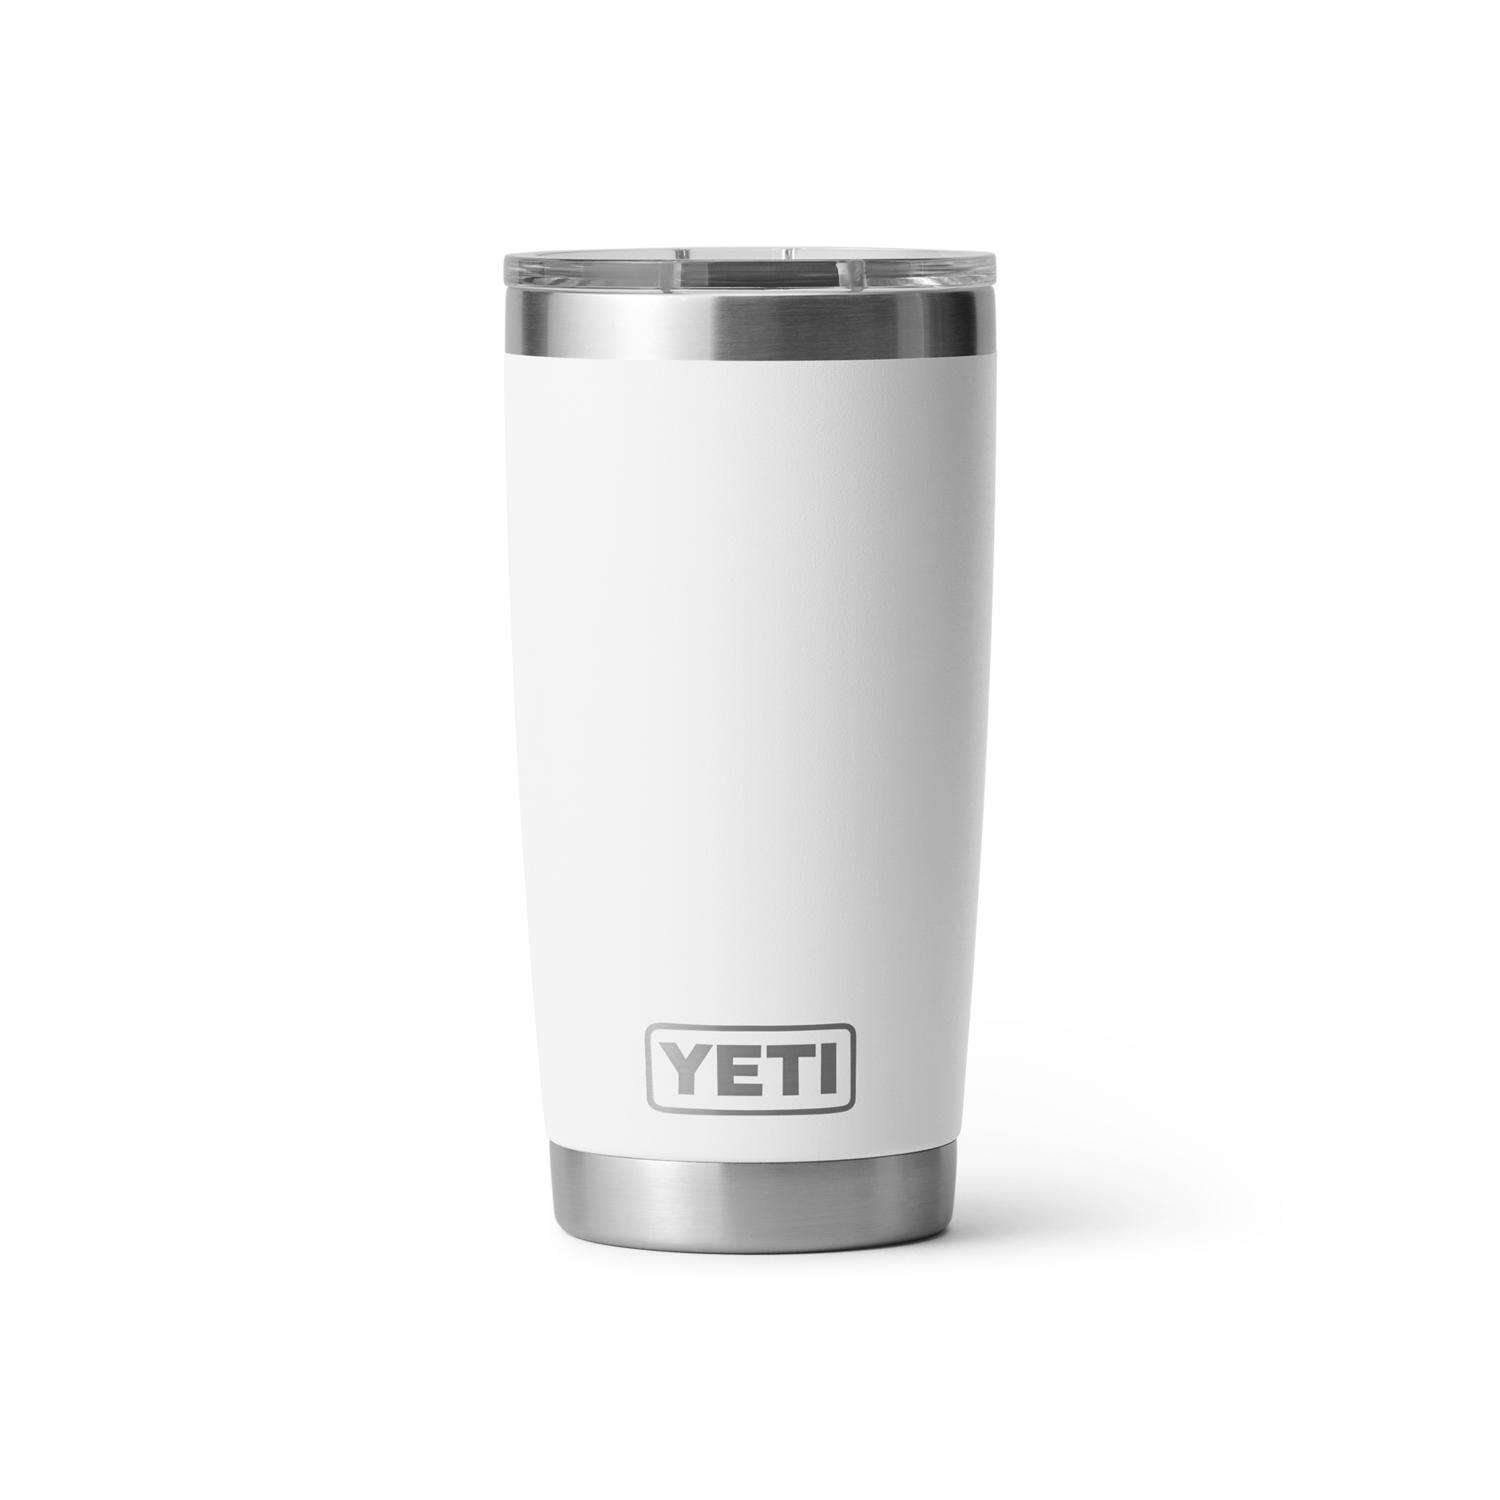 YETI Rambler 10 oz Tumbler, Stainless Steel, Vacuum Insulated with  MagSlider Lid, Cosmic Lilac